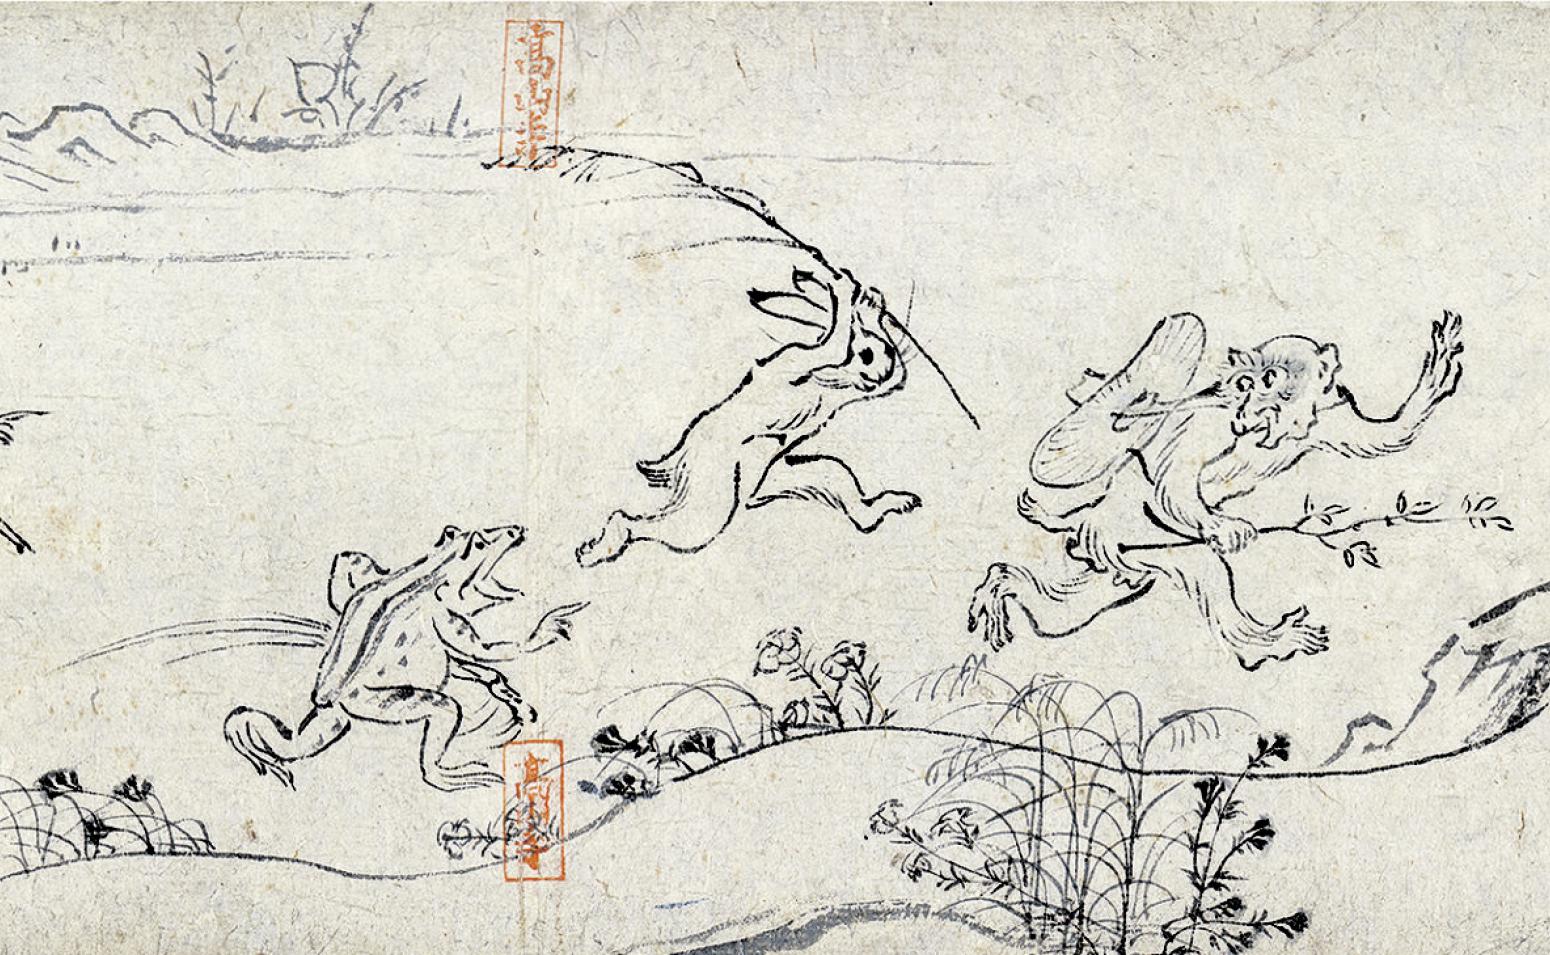 Illustration of monkey thief being chased by rabbit and frogs holding sticks. 